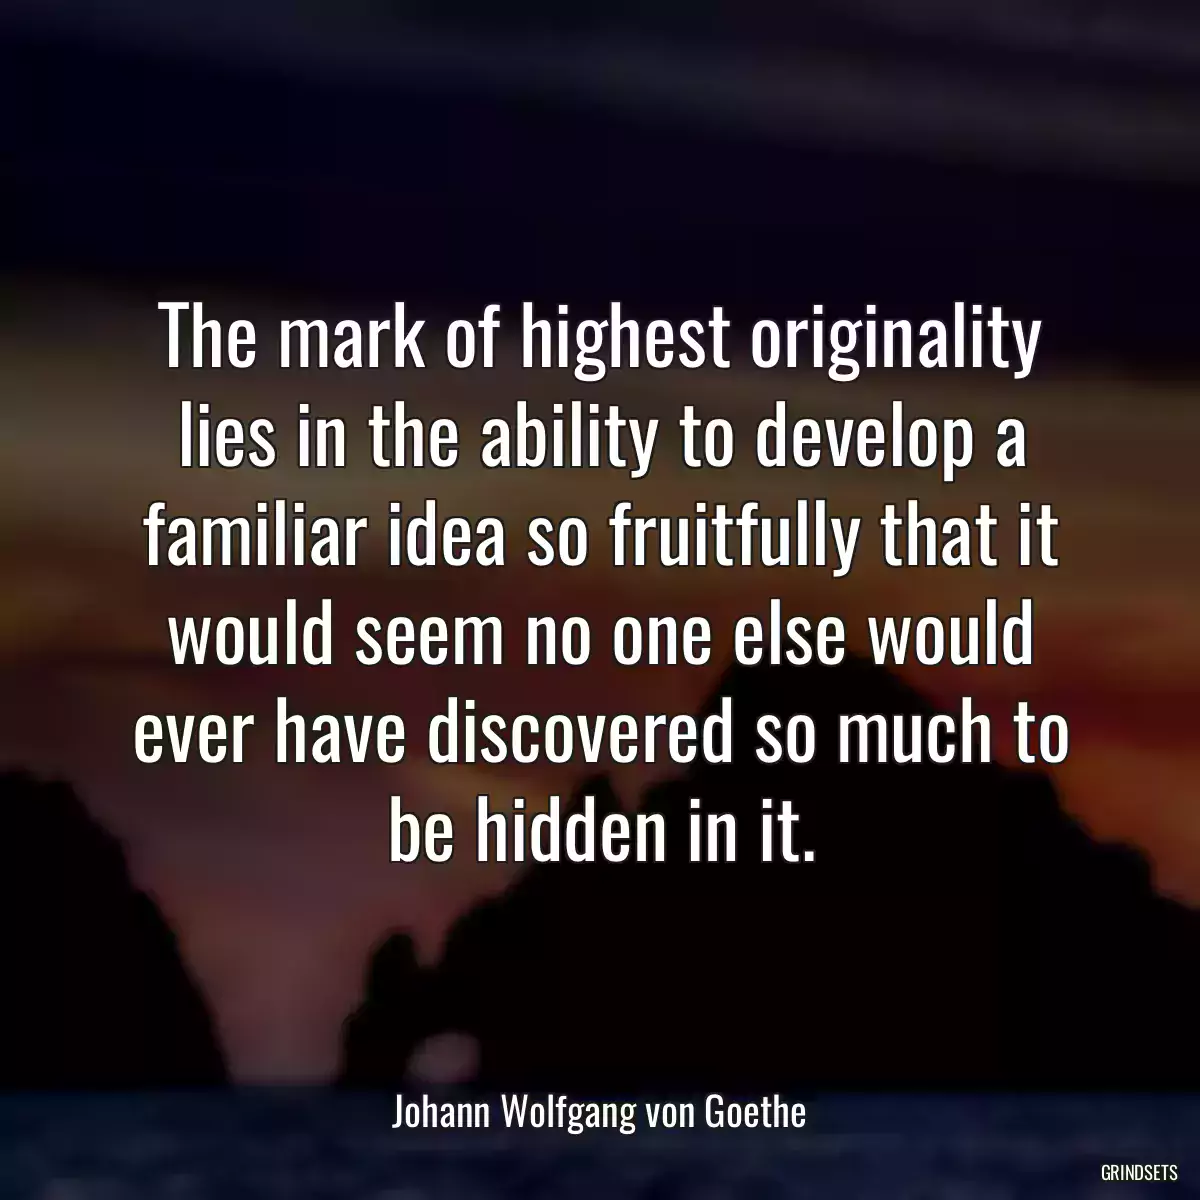 The mark of highest originality lies in the ability to develop a familiar idea so fruitfully that it would seem no one else would ever have discovered so much to be hidden in it.